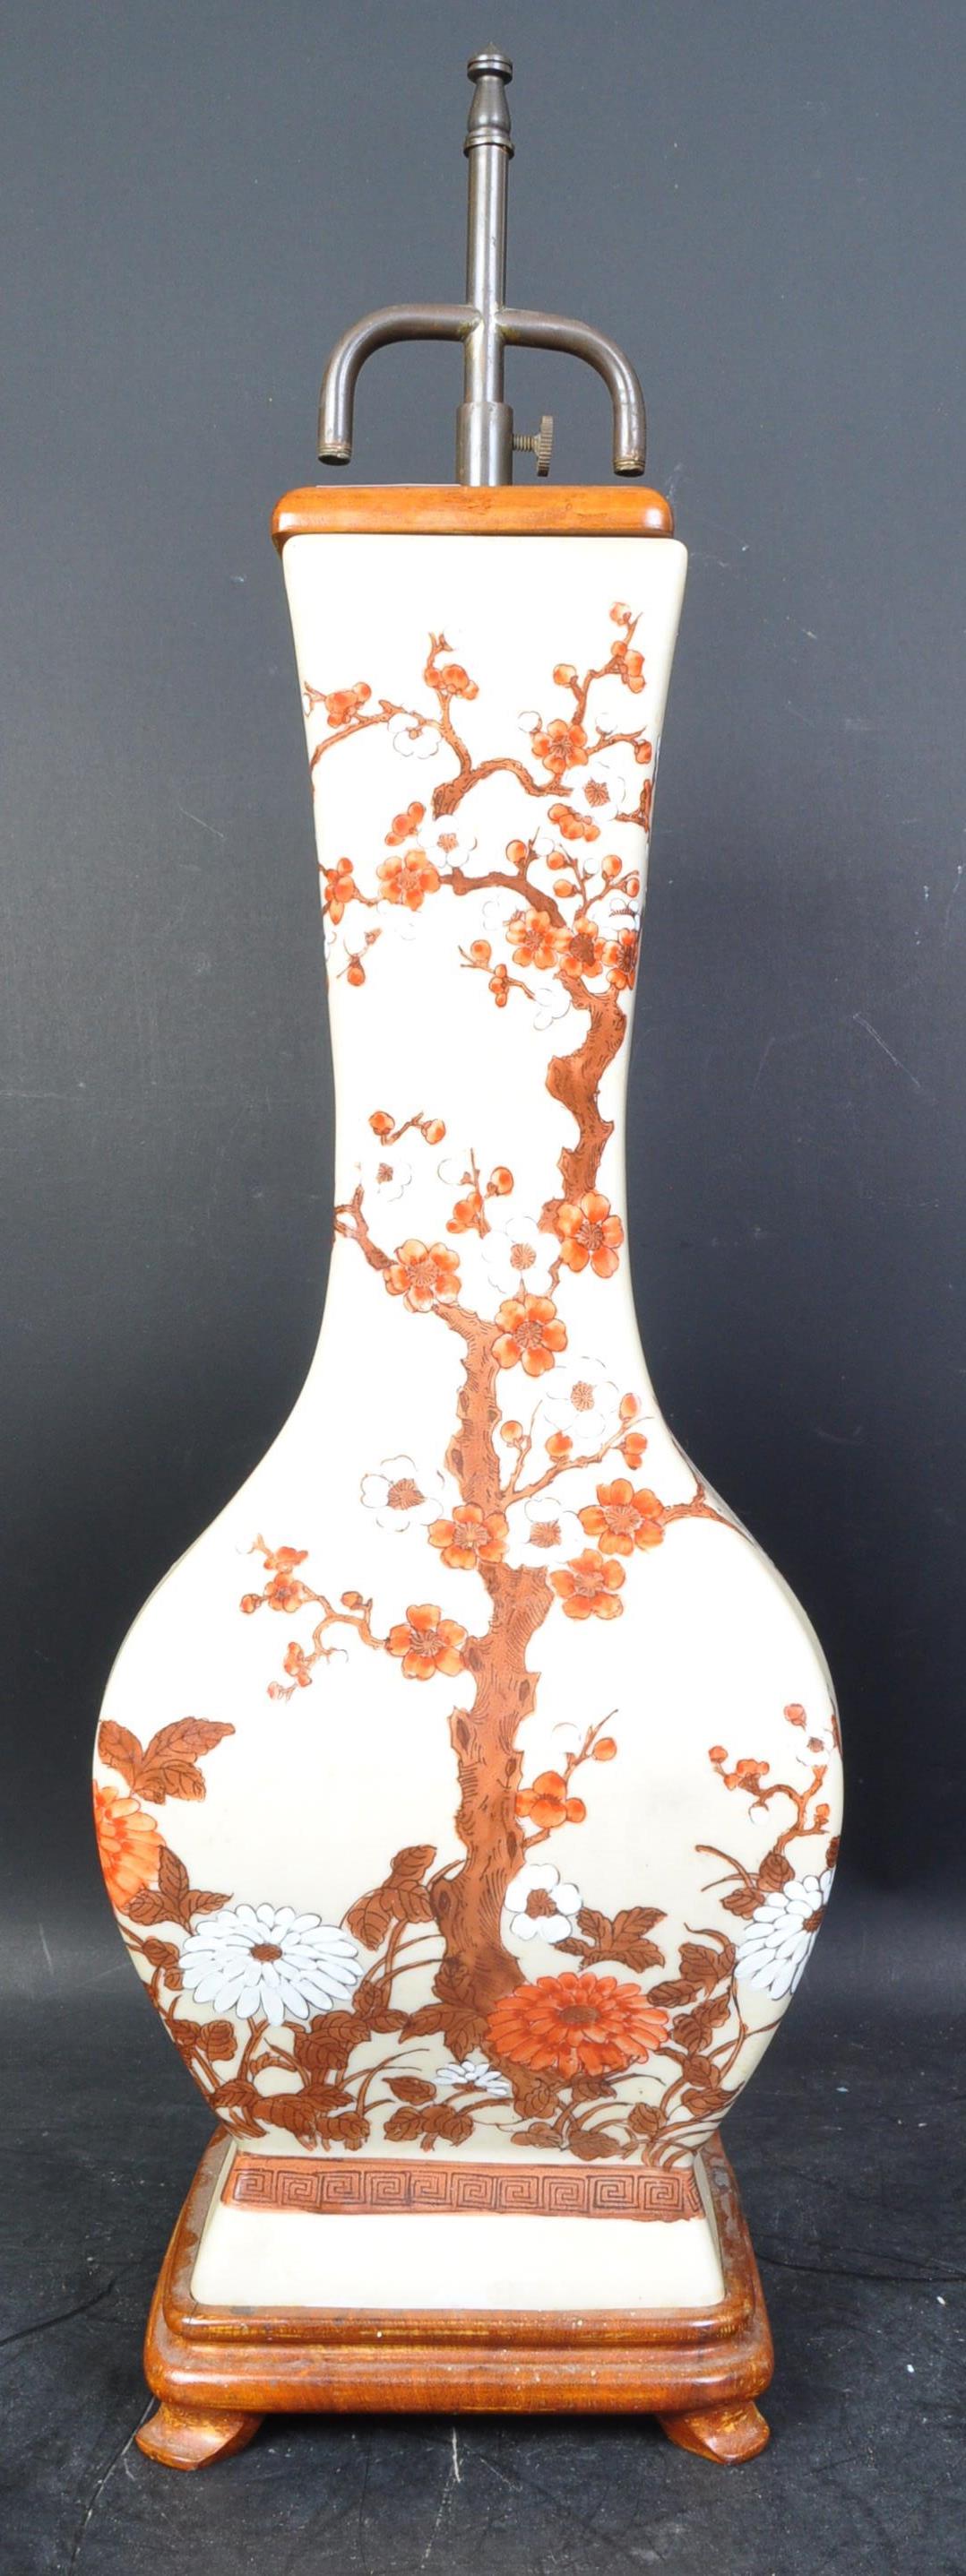 20TH CENTURY CHINESE CERAMIC TABLE LAMP - Image 2 of 5